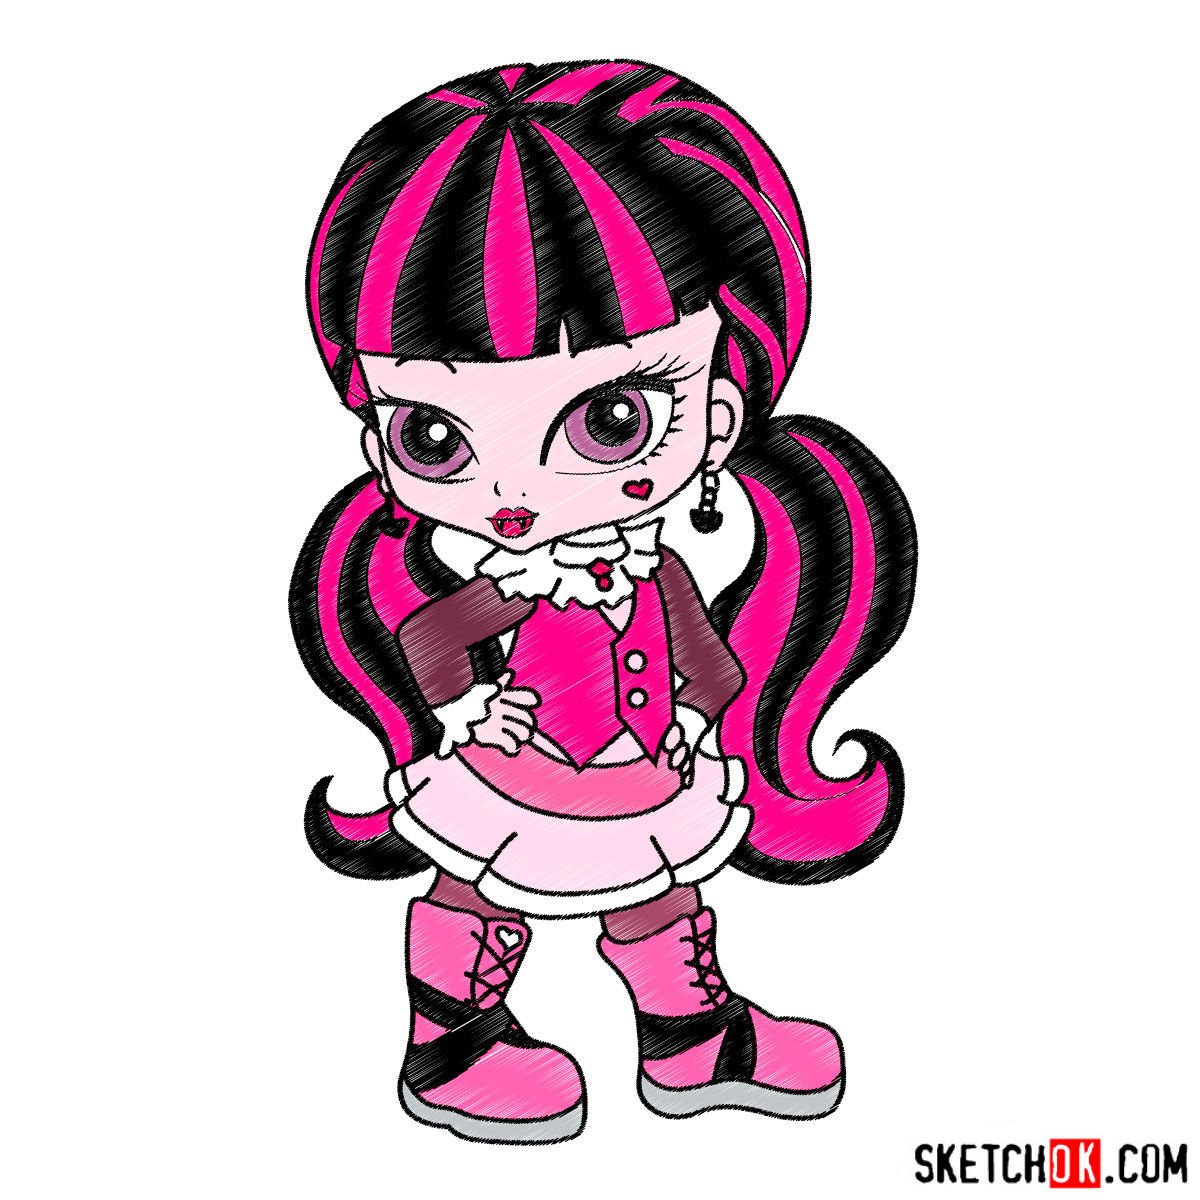 How to draw chibi style Draculaura